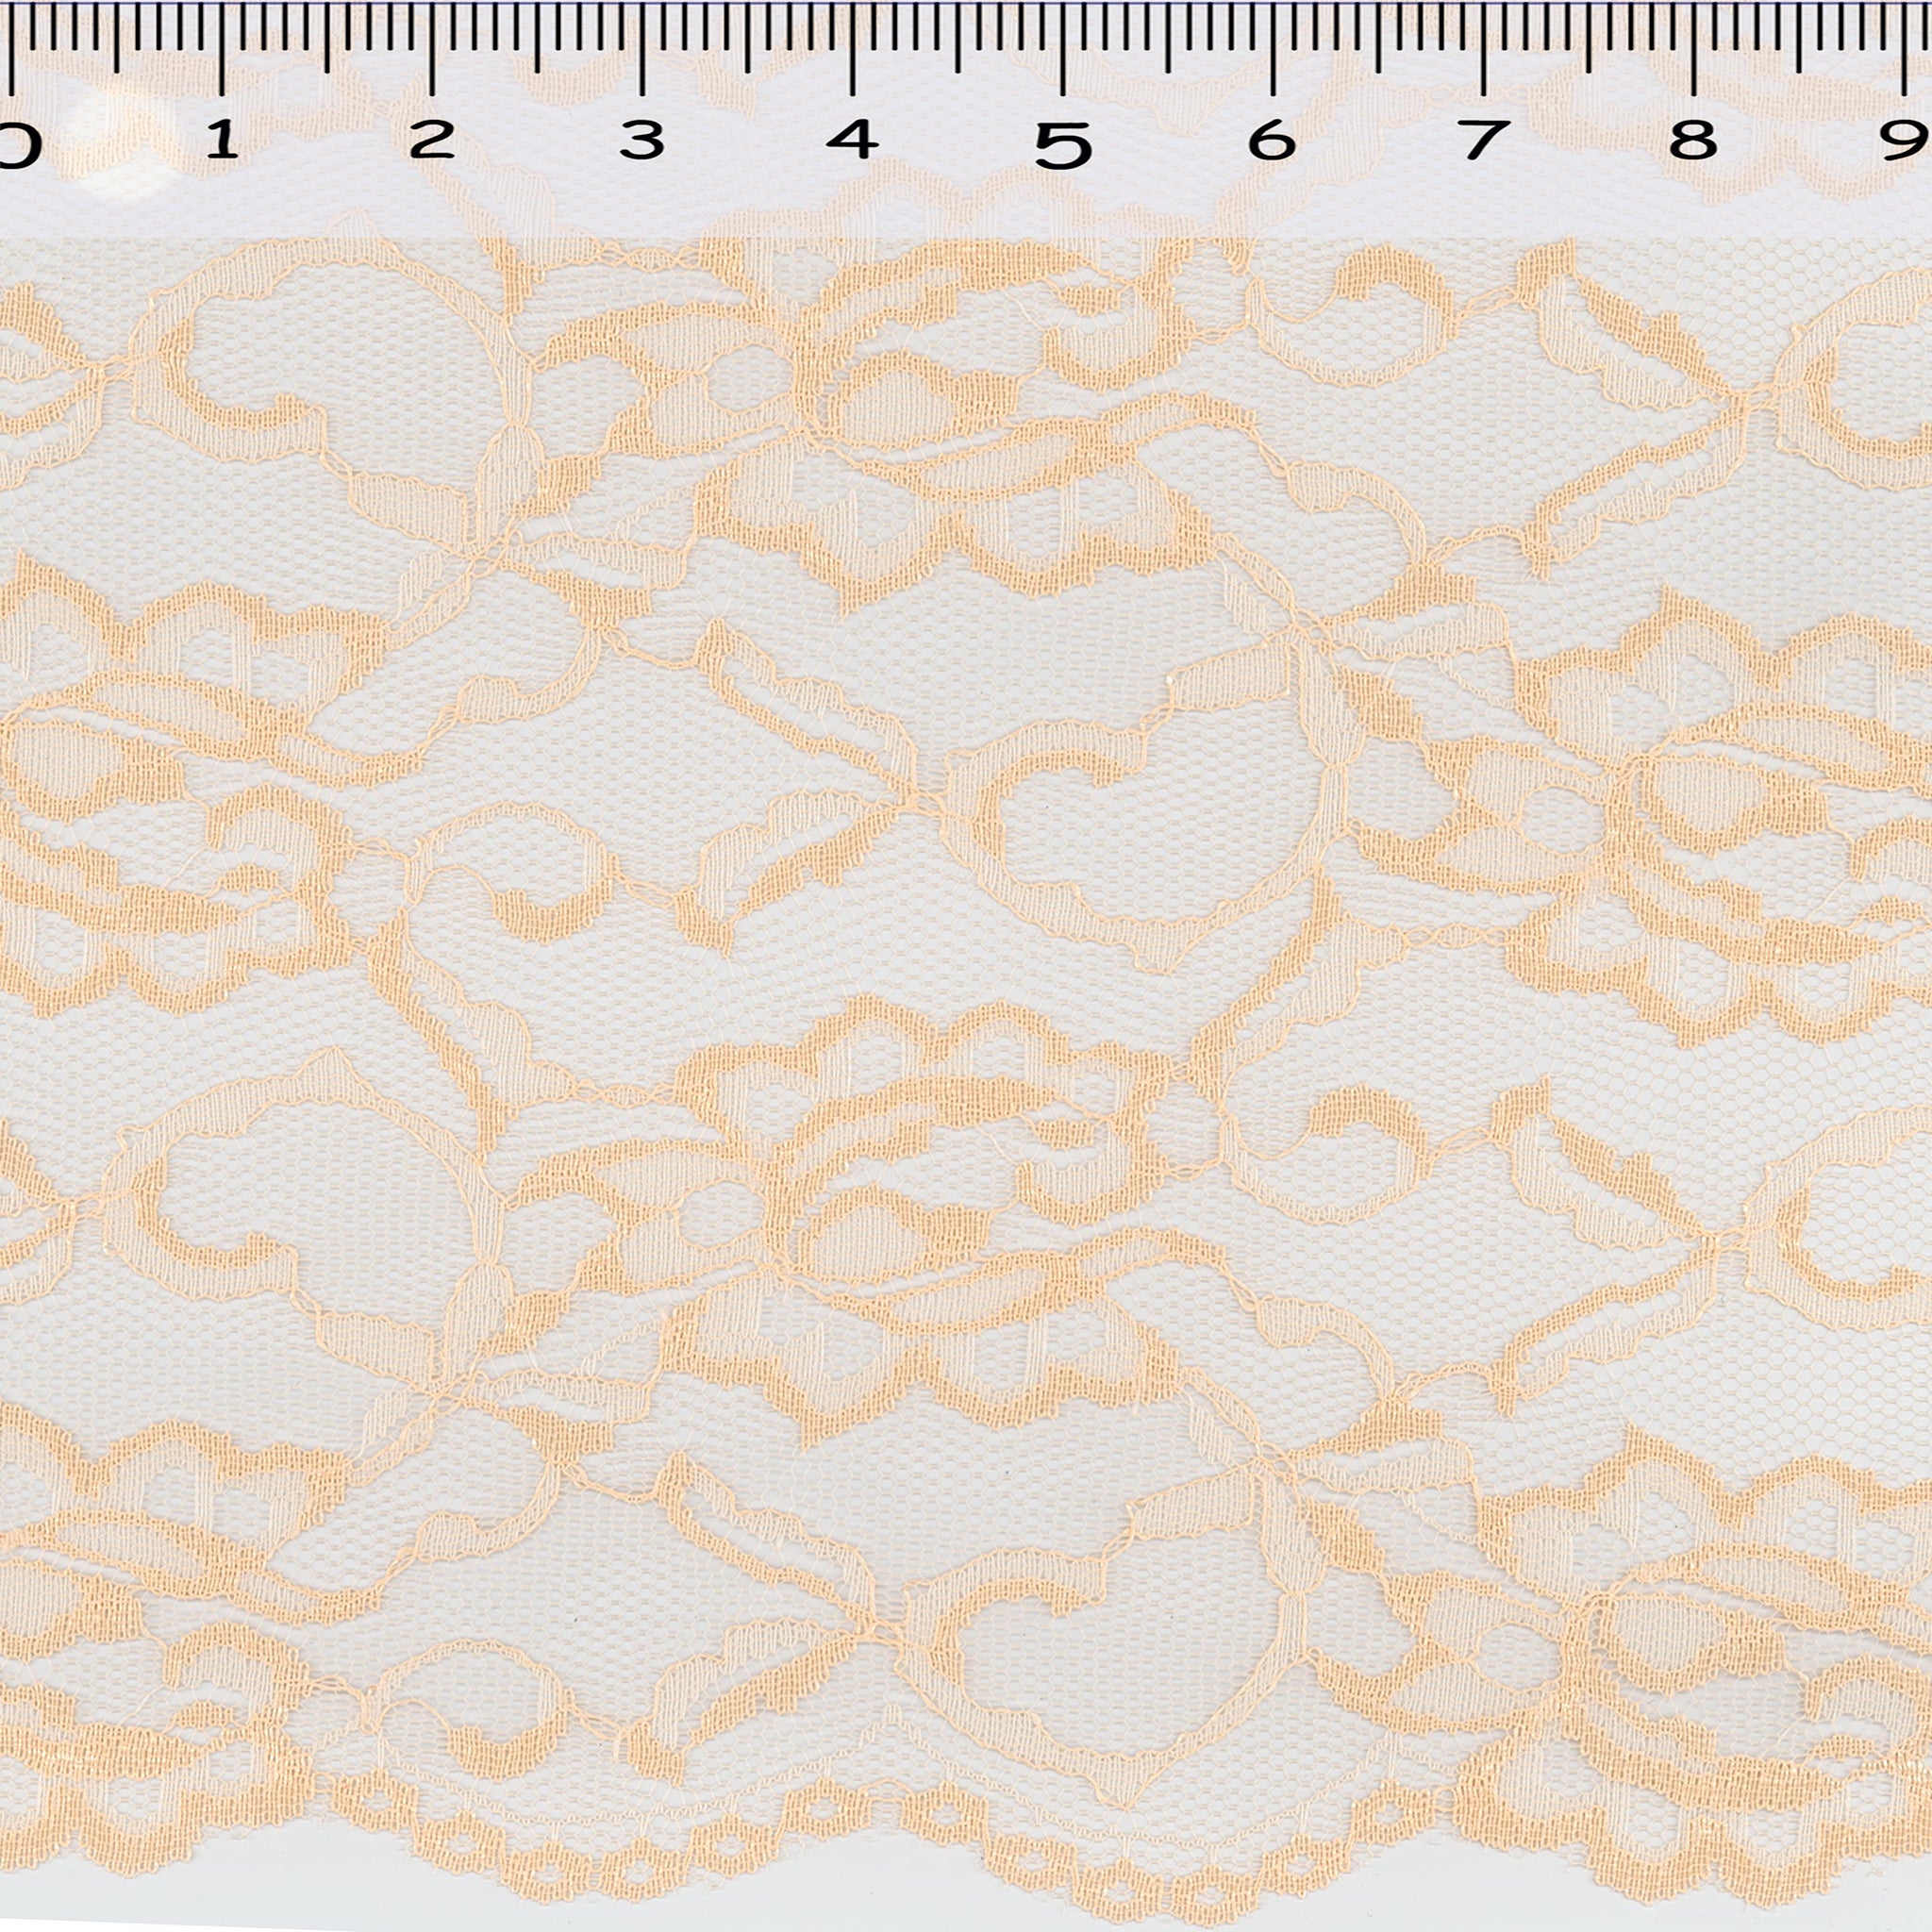 Cotton UL Demi Eyelet Lace Galloon